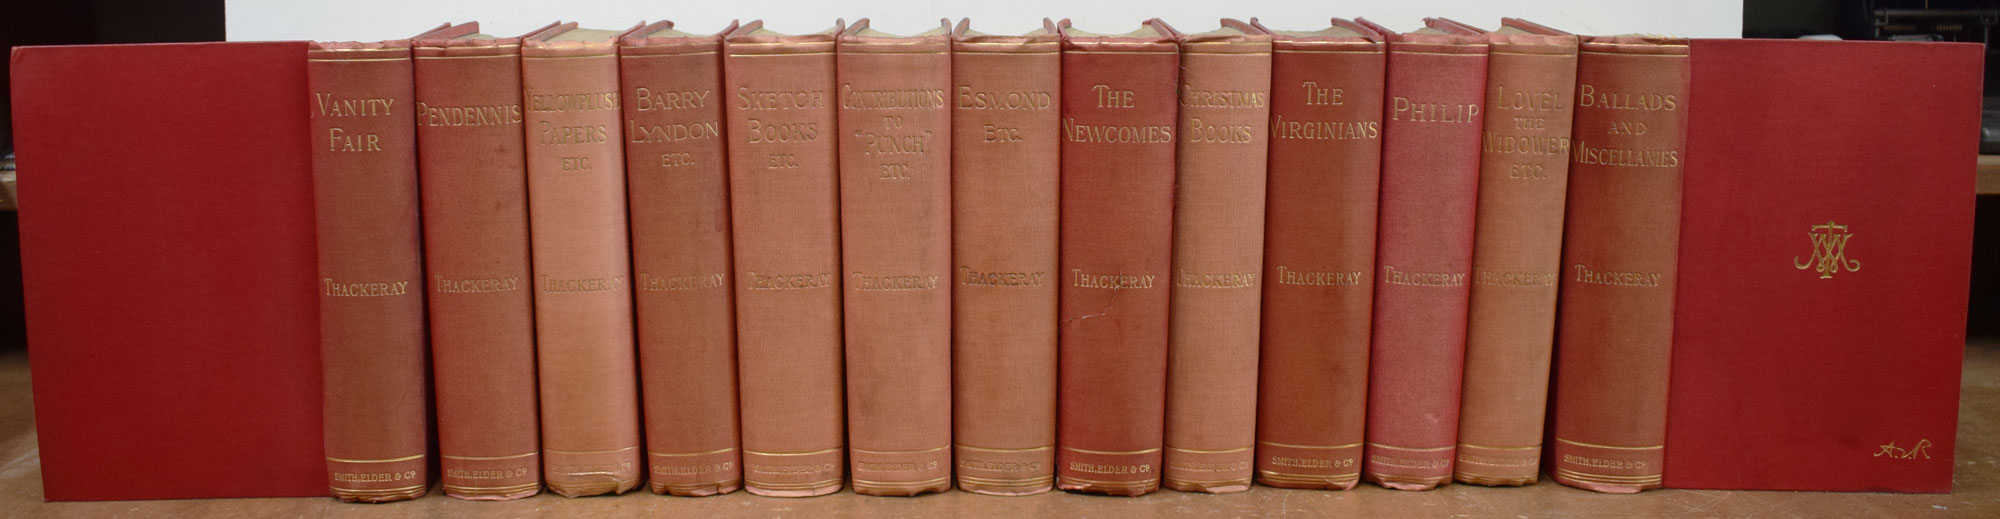 THACKERAY, WILLIAM MAKEPEACE - The Works of William Makepeace Thackeray with Biographical Introduction by His Daughter, Anne Ritchie. Smith, Elder, & Co Editions. Complete 13 Volume Set